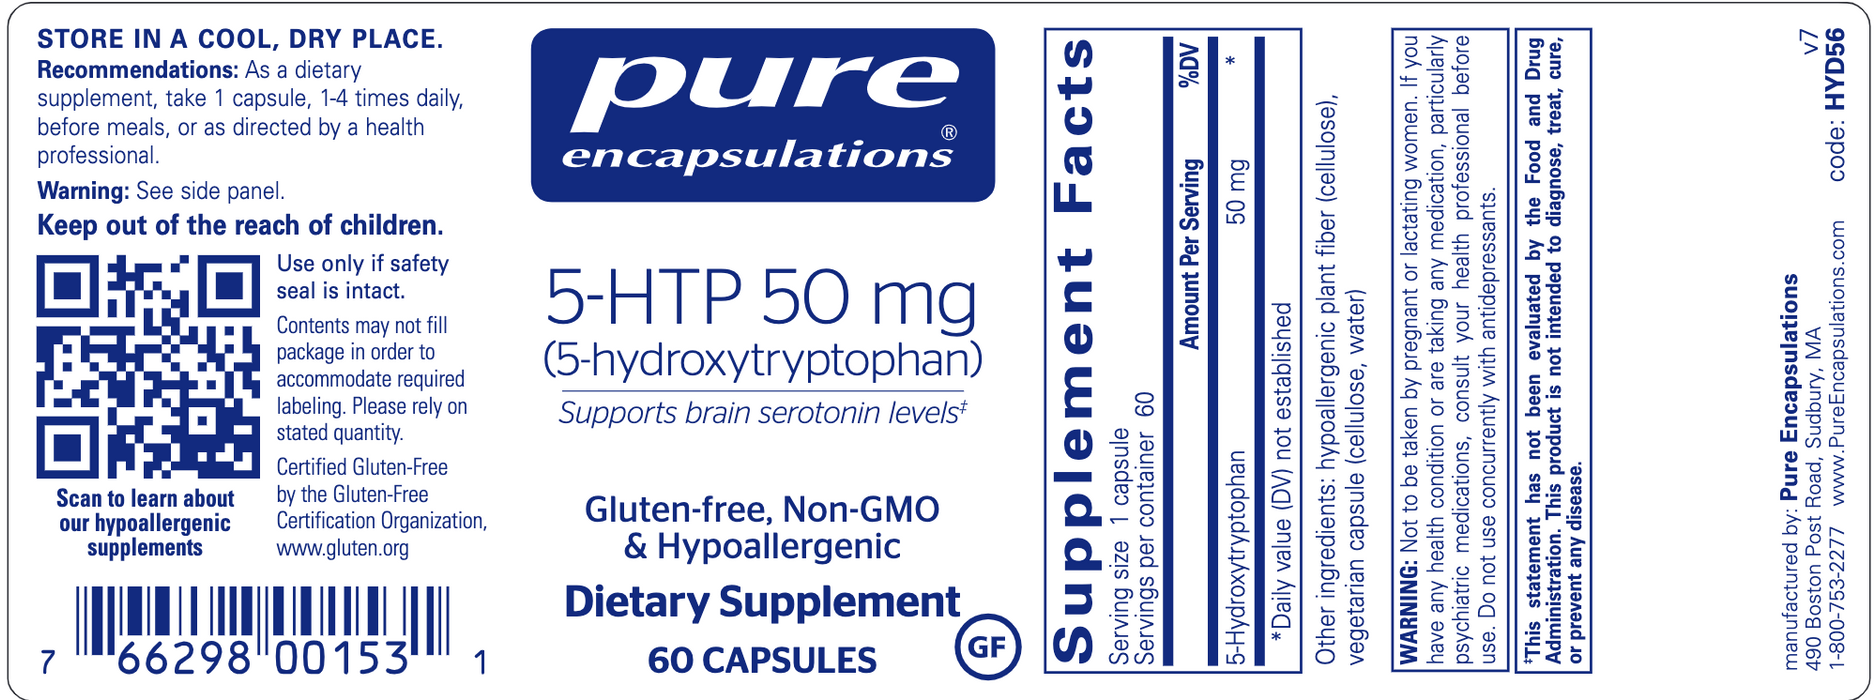 5-HTP (5-Hydroxytryptophan) (50 mg)-Vitamins & Supplements-Pure Encapsulations-180 Capsules-Pine Street Clinic